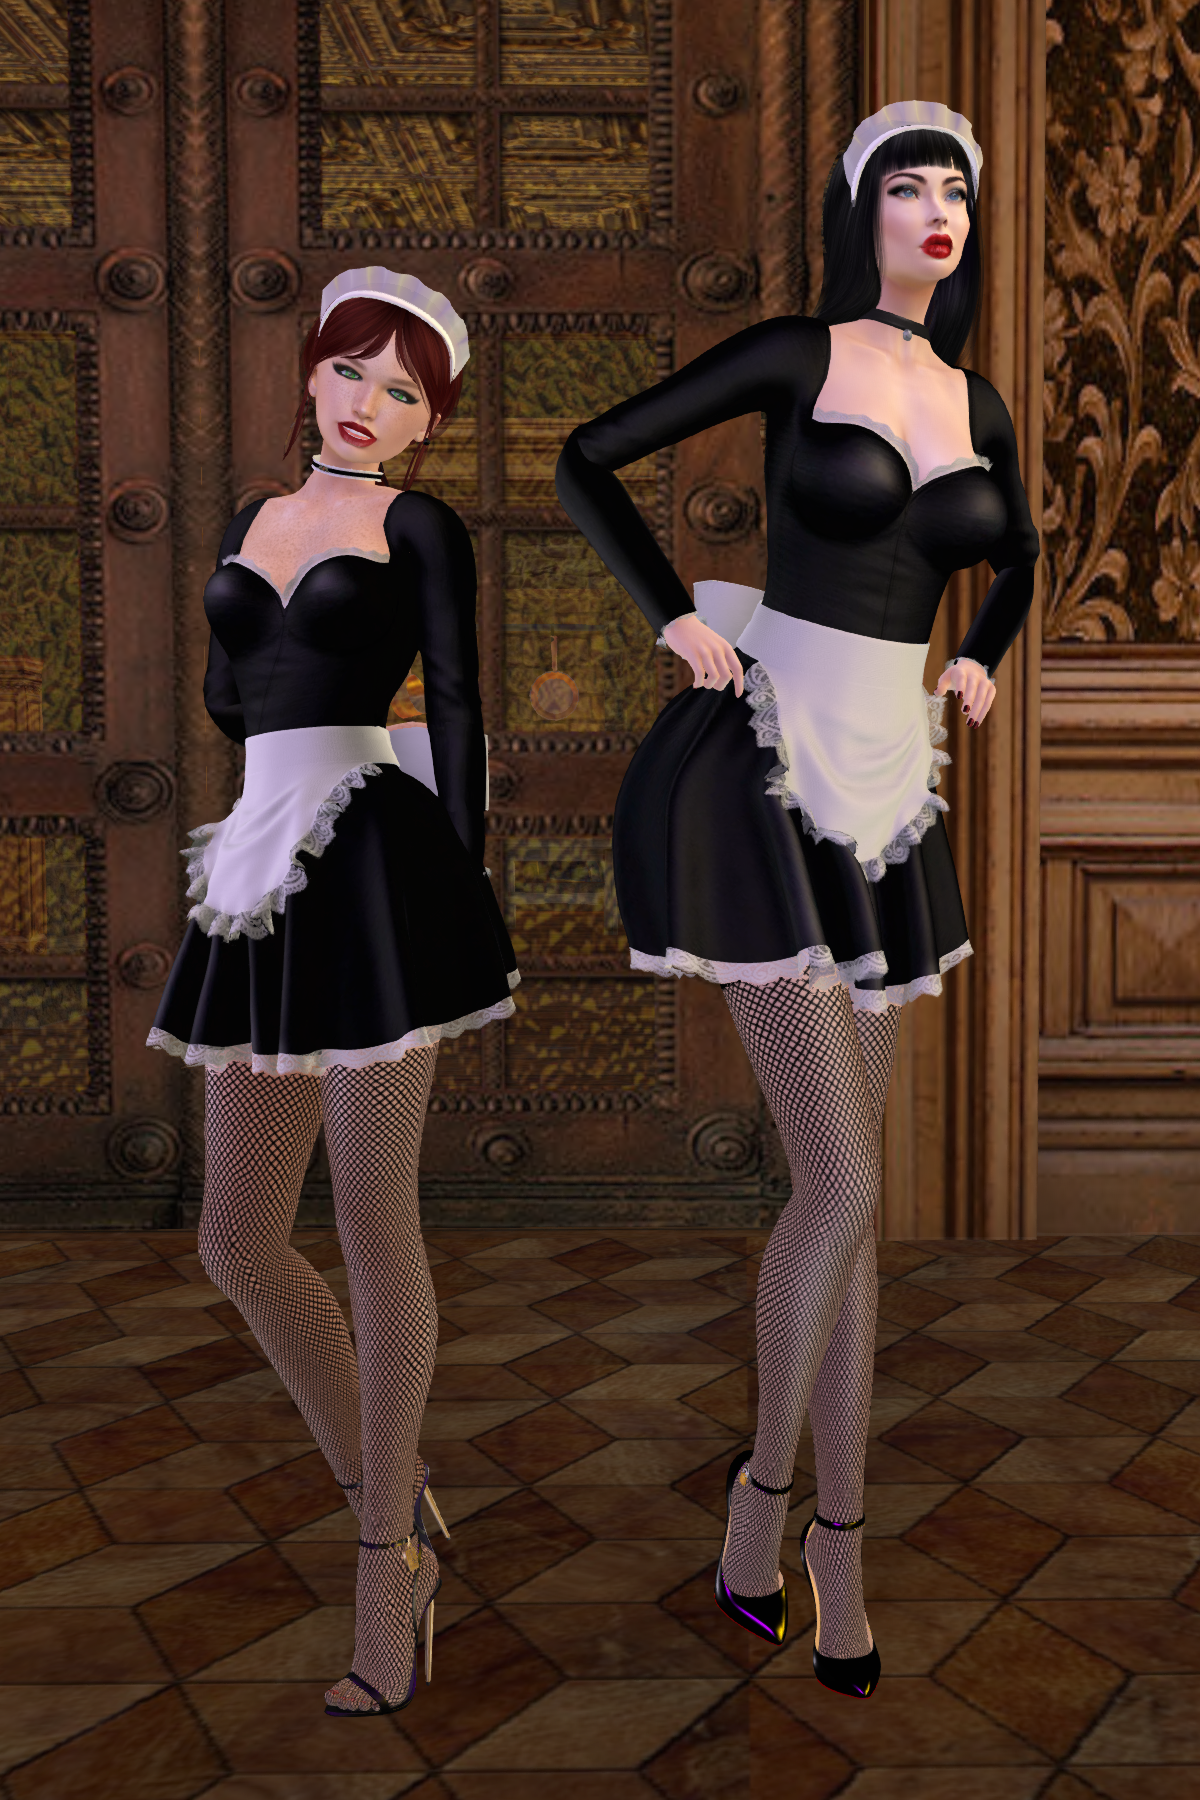 The Sexiest Maids on the Grid by EnglishDamsel on DeviantArt